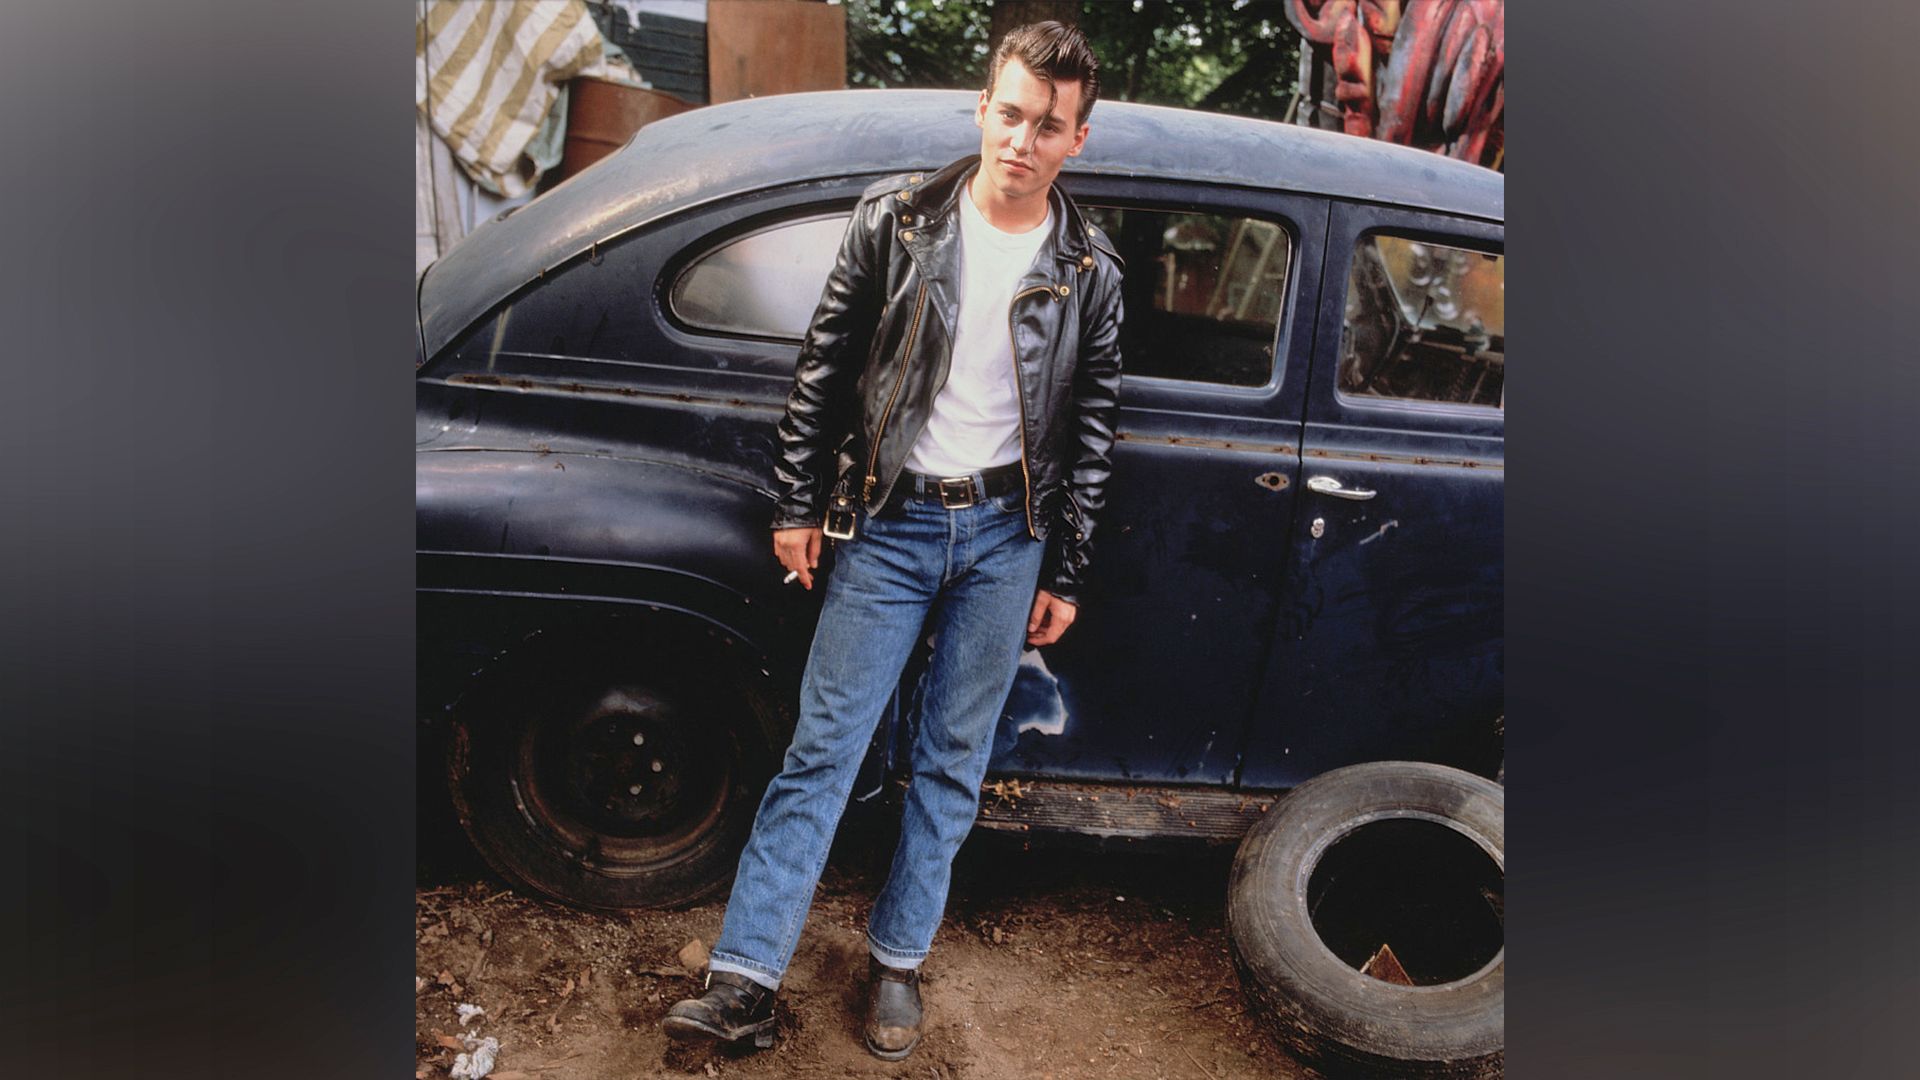 Johnny Depp as Cry-Baby (1990)